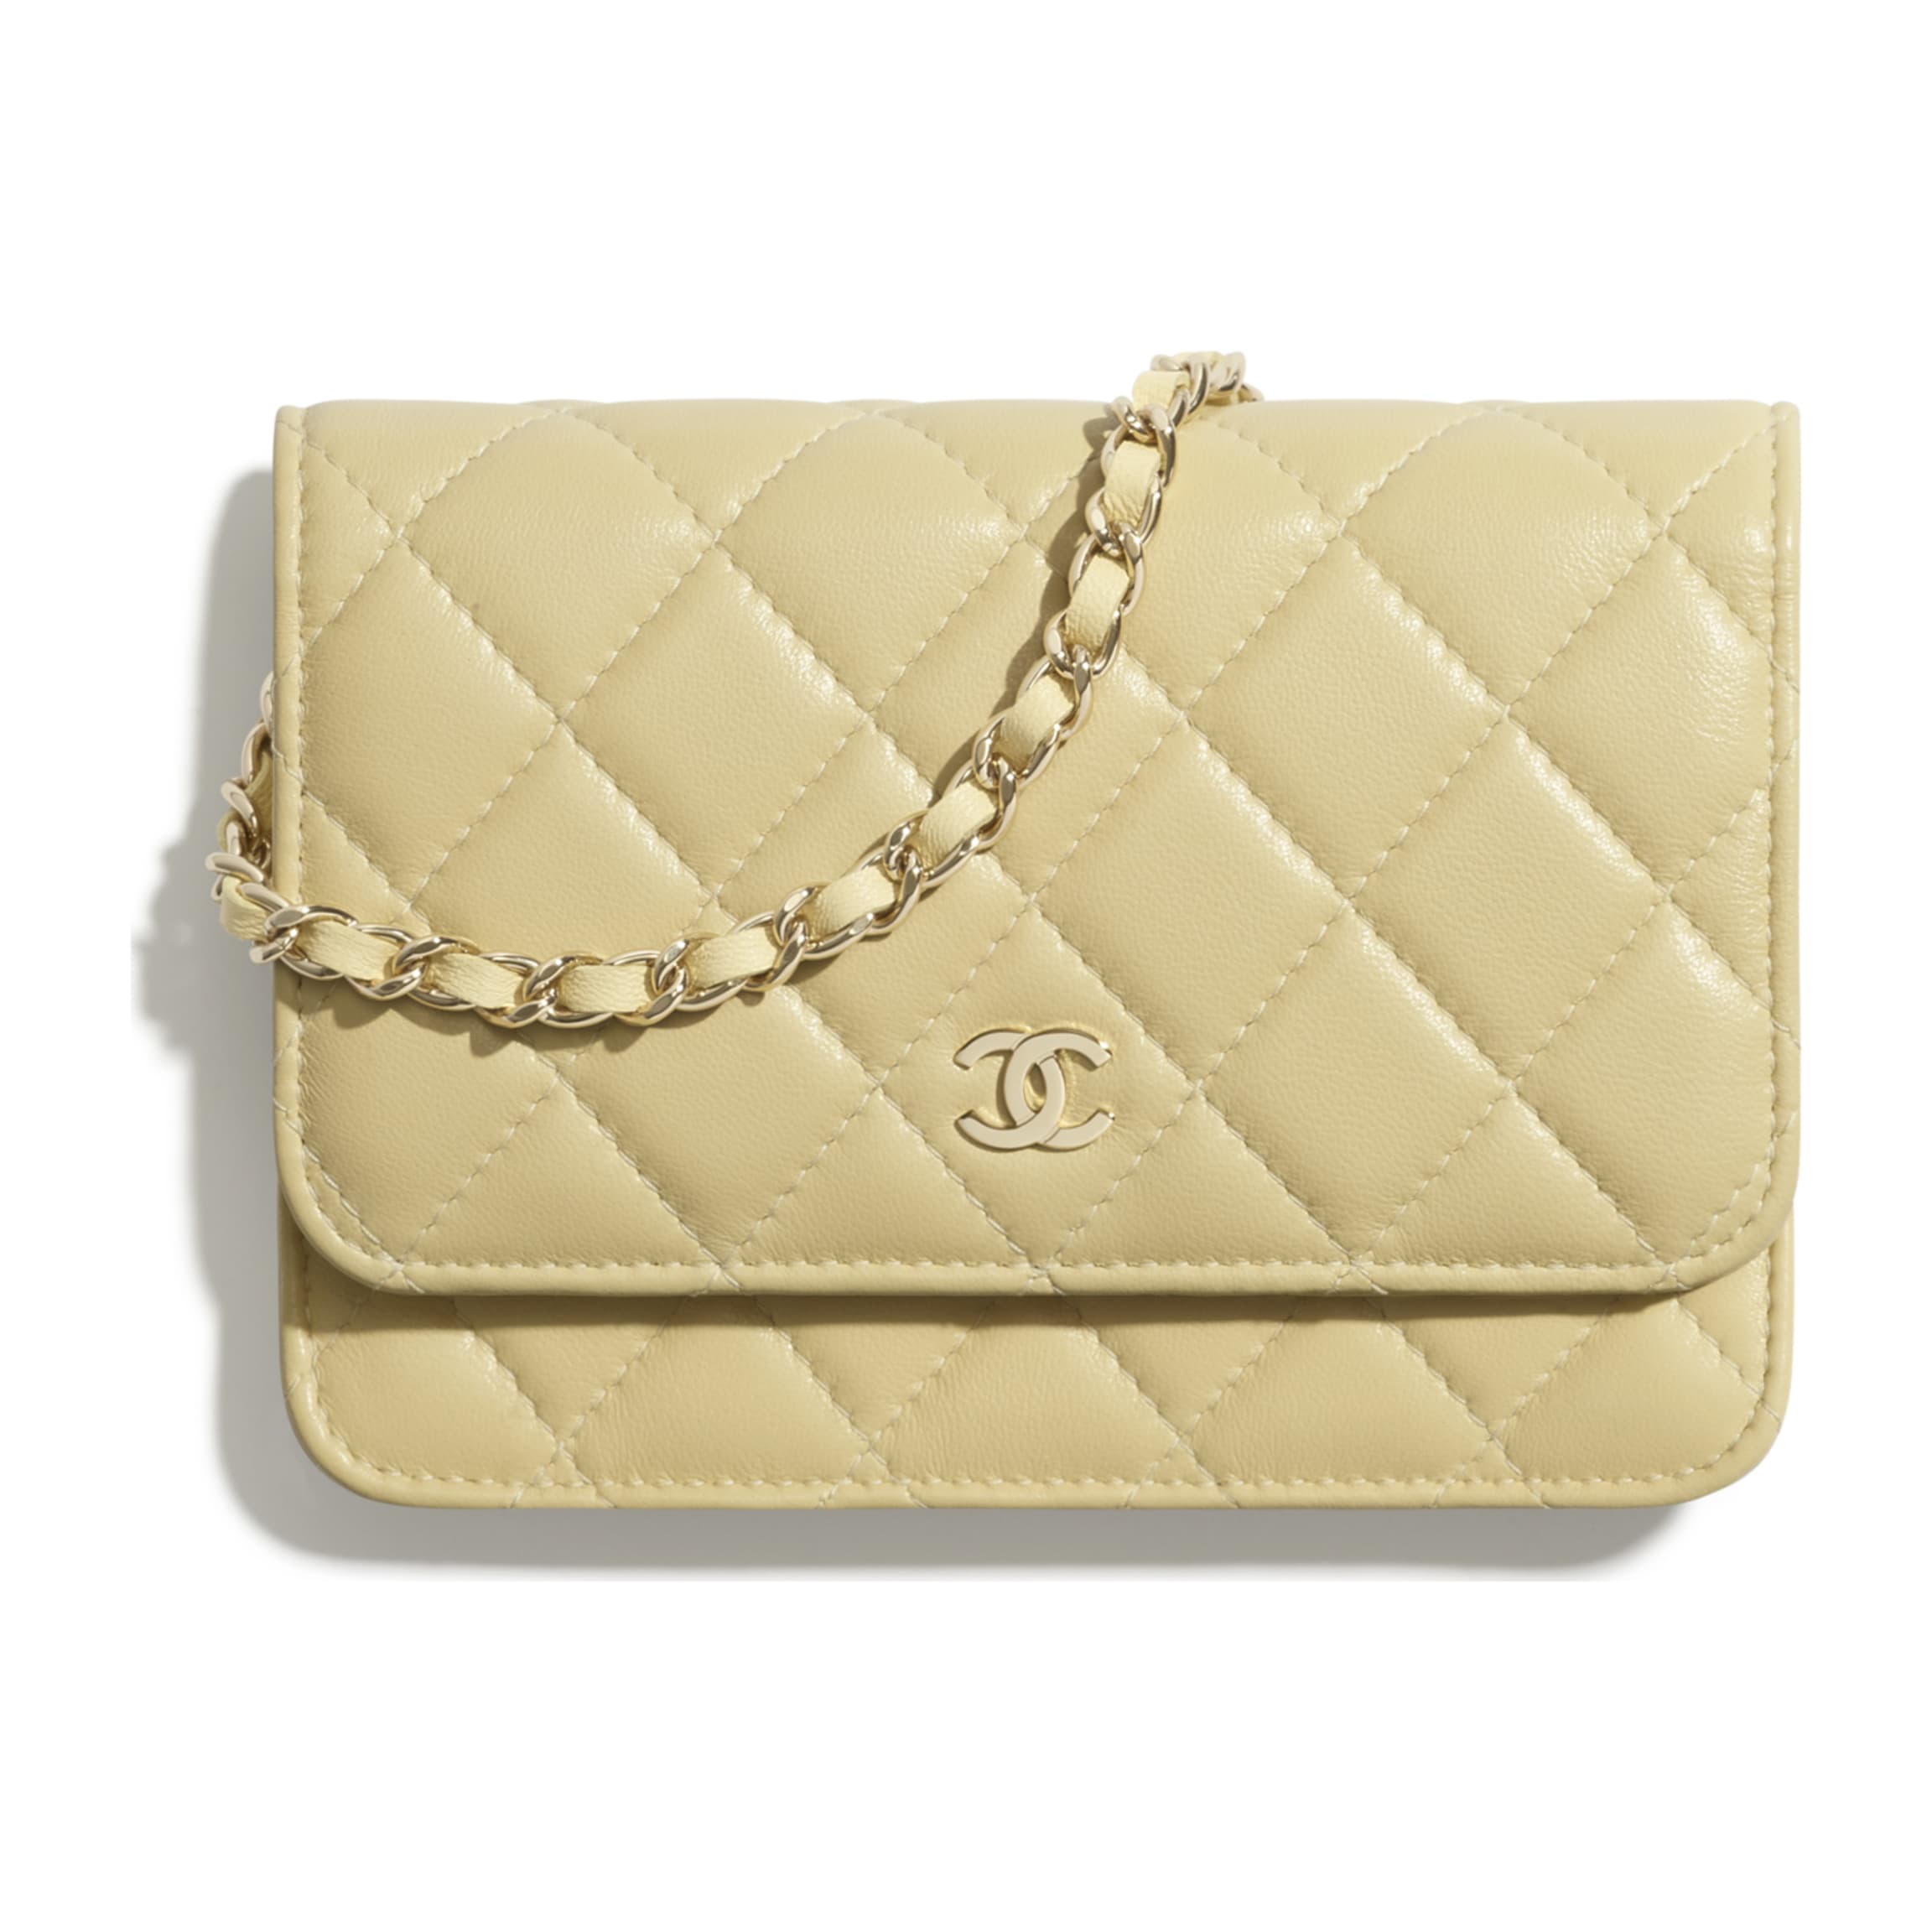 Wardrobe Essentials: What Purses Should Every Woman Own? – Bagaholic